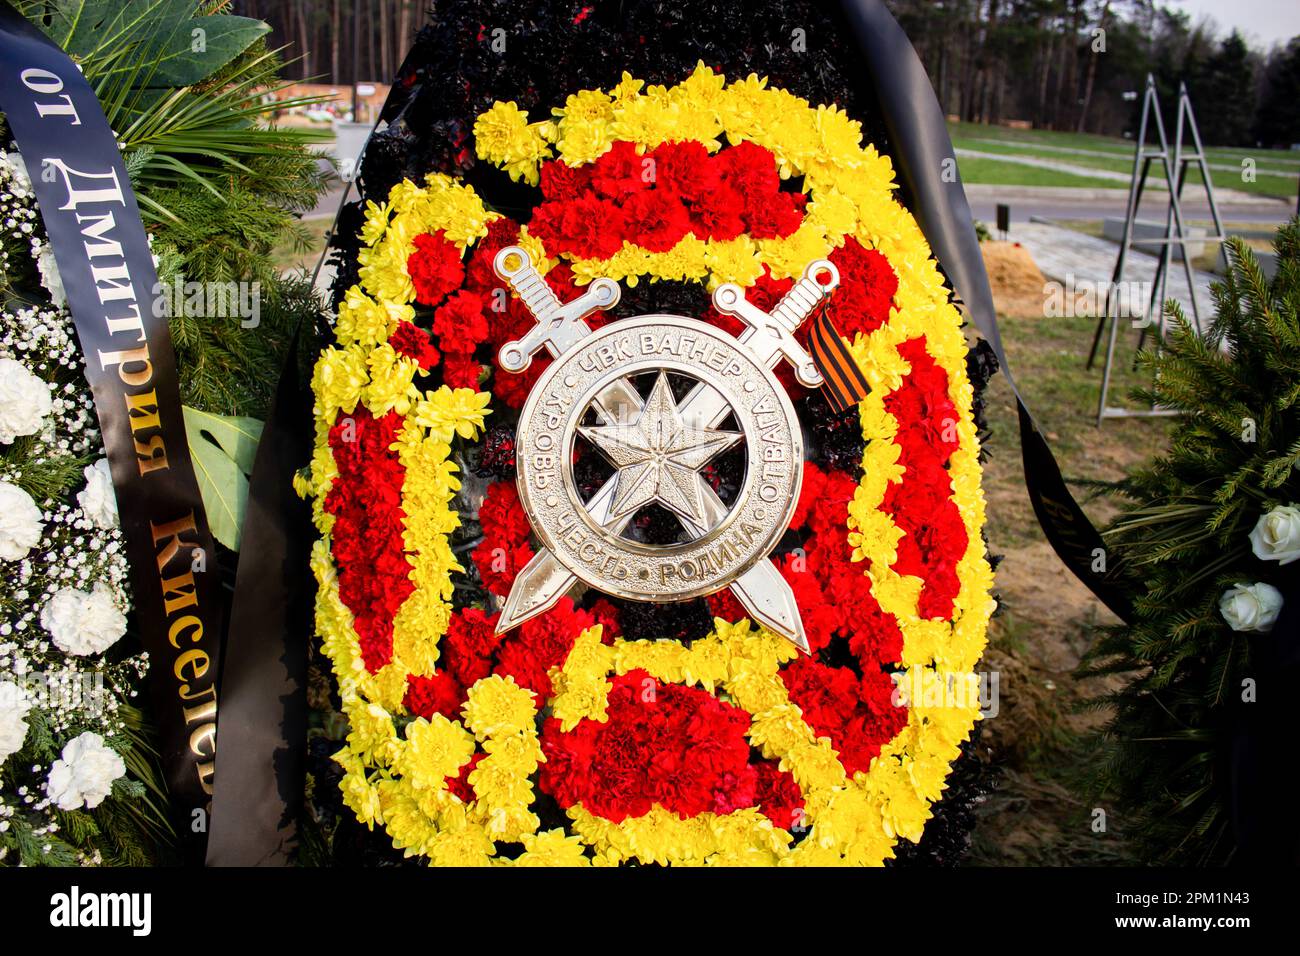 A funeral wreath is left at the grave of Vladlen Tatarsky at Troyekurovskoye cemetery in Moscow. Maxim Fomin better known by his pen-name Vladlen Tatarsky was a convicted criminal who escaped from prison and made a name for himself as a Ukrainian-born Russian military blogger and a participant in the war between Russian and Ukraine. He was active as a propagandist for the Russian side in the war until he was murdered in a terrorist act in St. Petersburg on April 2, 2023. 26-year-old woman named Darya Trepova was arrested for the bombing that had killed Tatarsky and injured dozens of others. (P Stock Photo